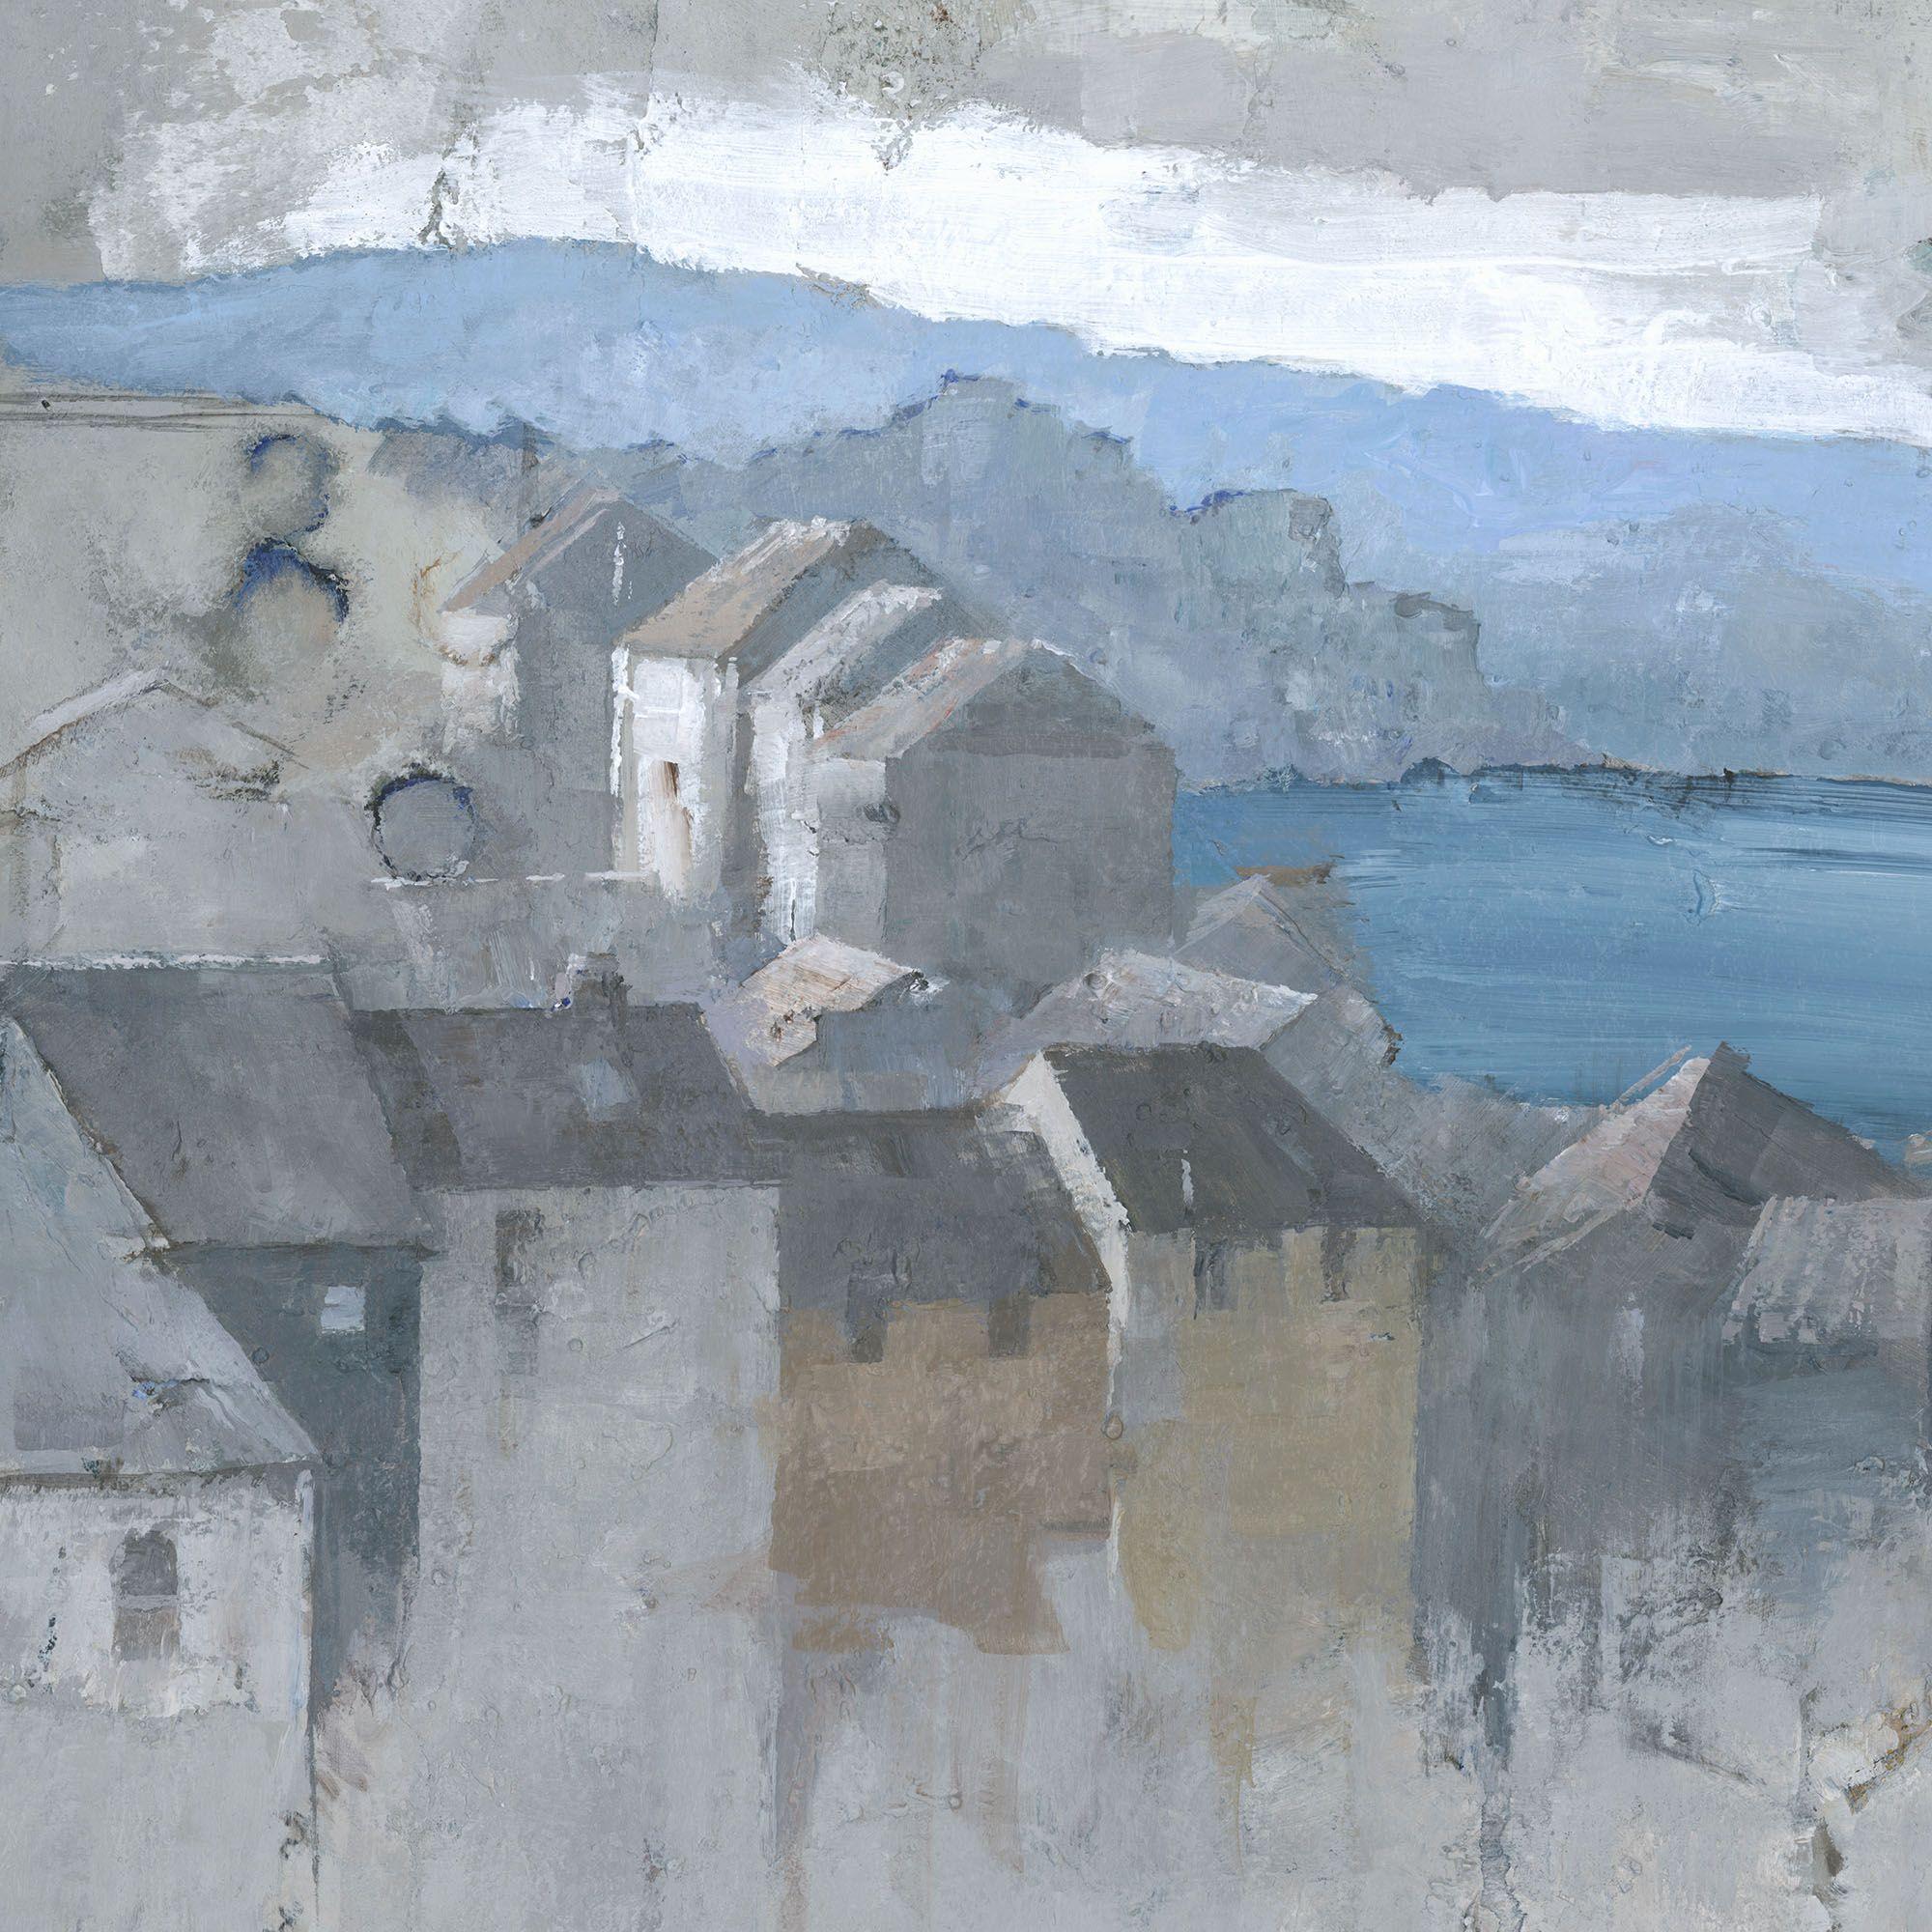 This is an original painting of the Cornish harbour town of Fowey. I built up the surface of the canvas with interesting textures and abstract shapes, before deciding on a subject that would complement it, trying to incorporate the lines and